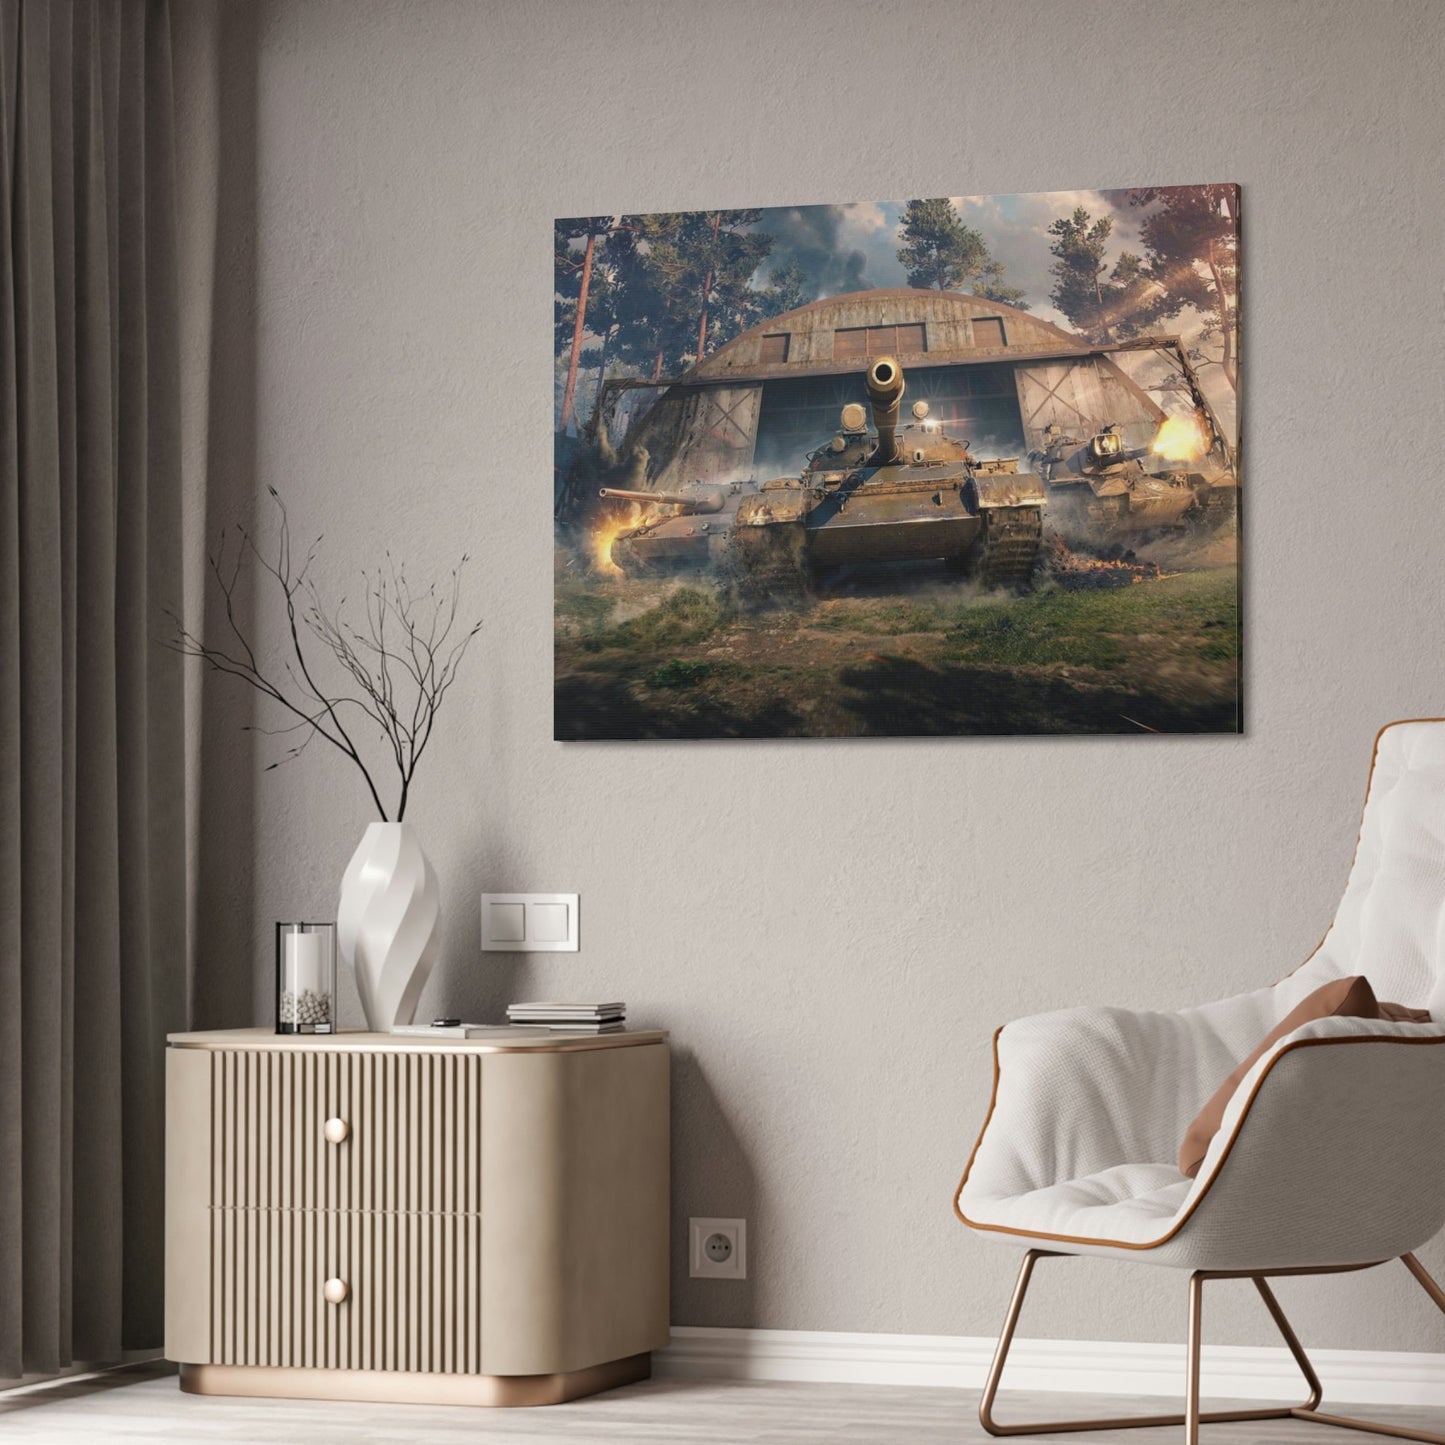 Steel Titans Clash: World of Tanks Сanvas Wall Art for Your Space